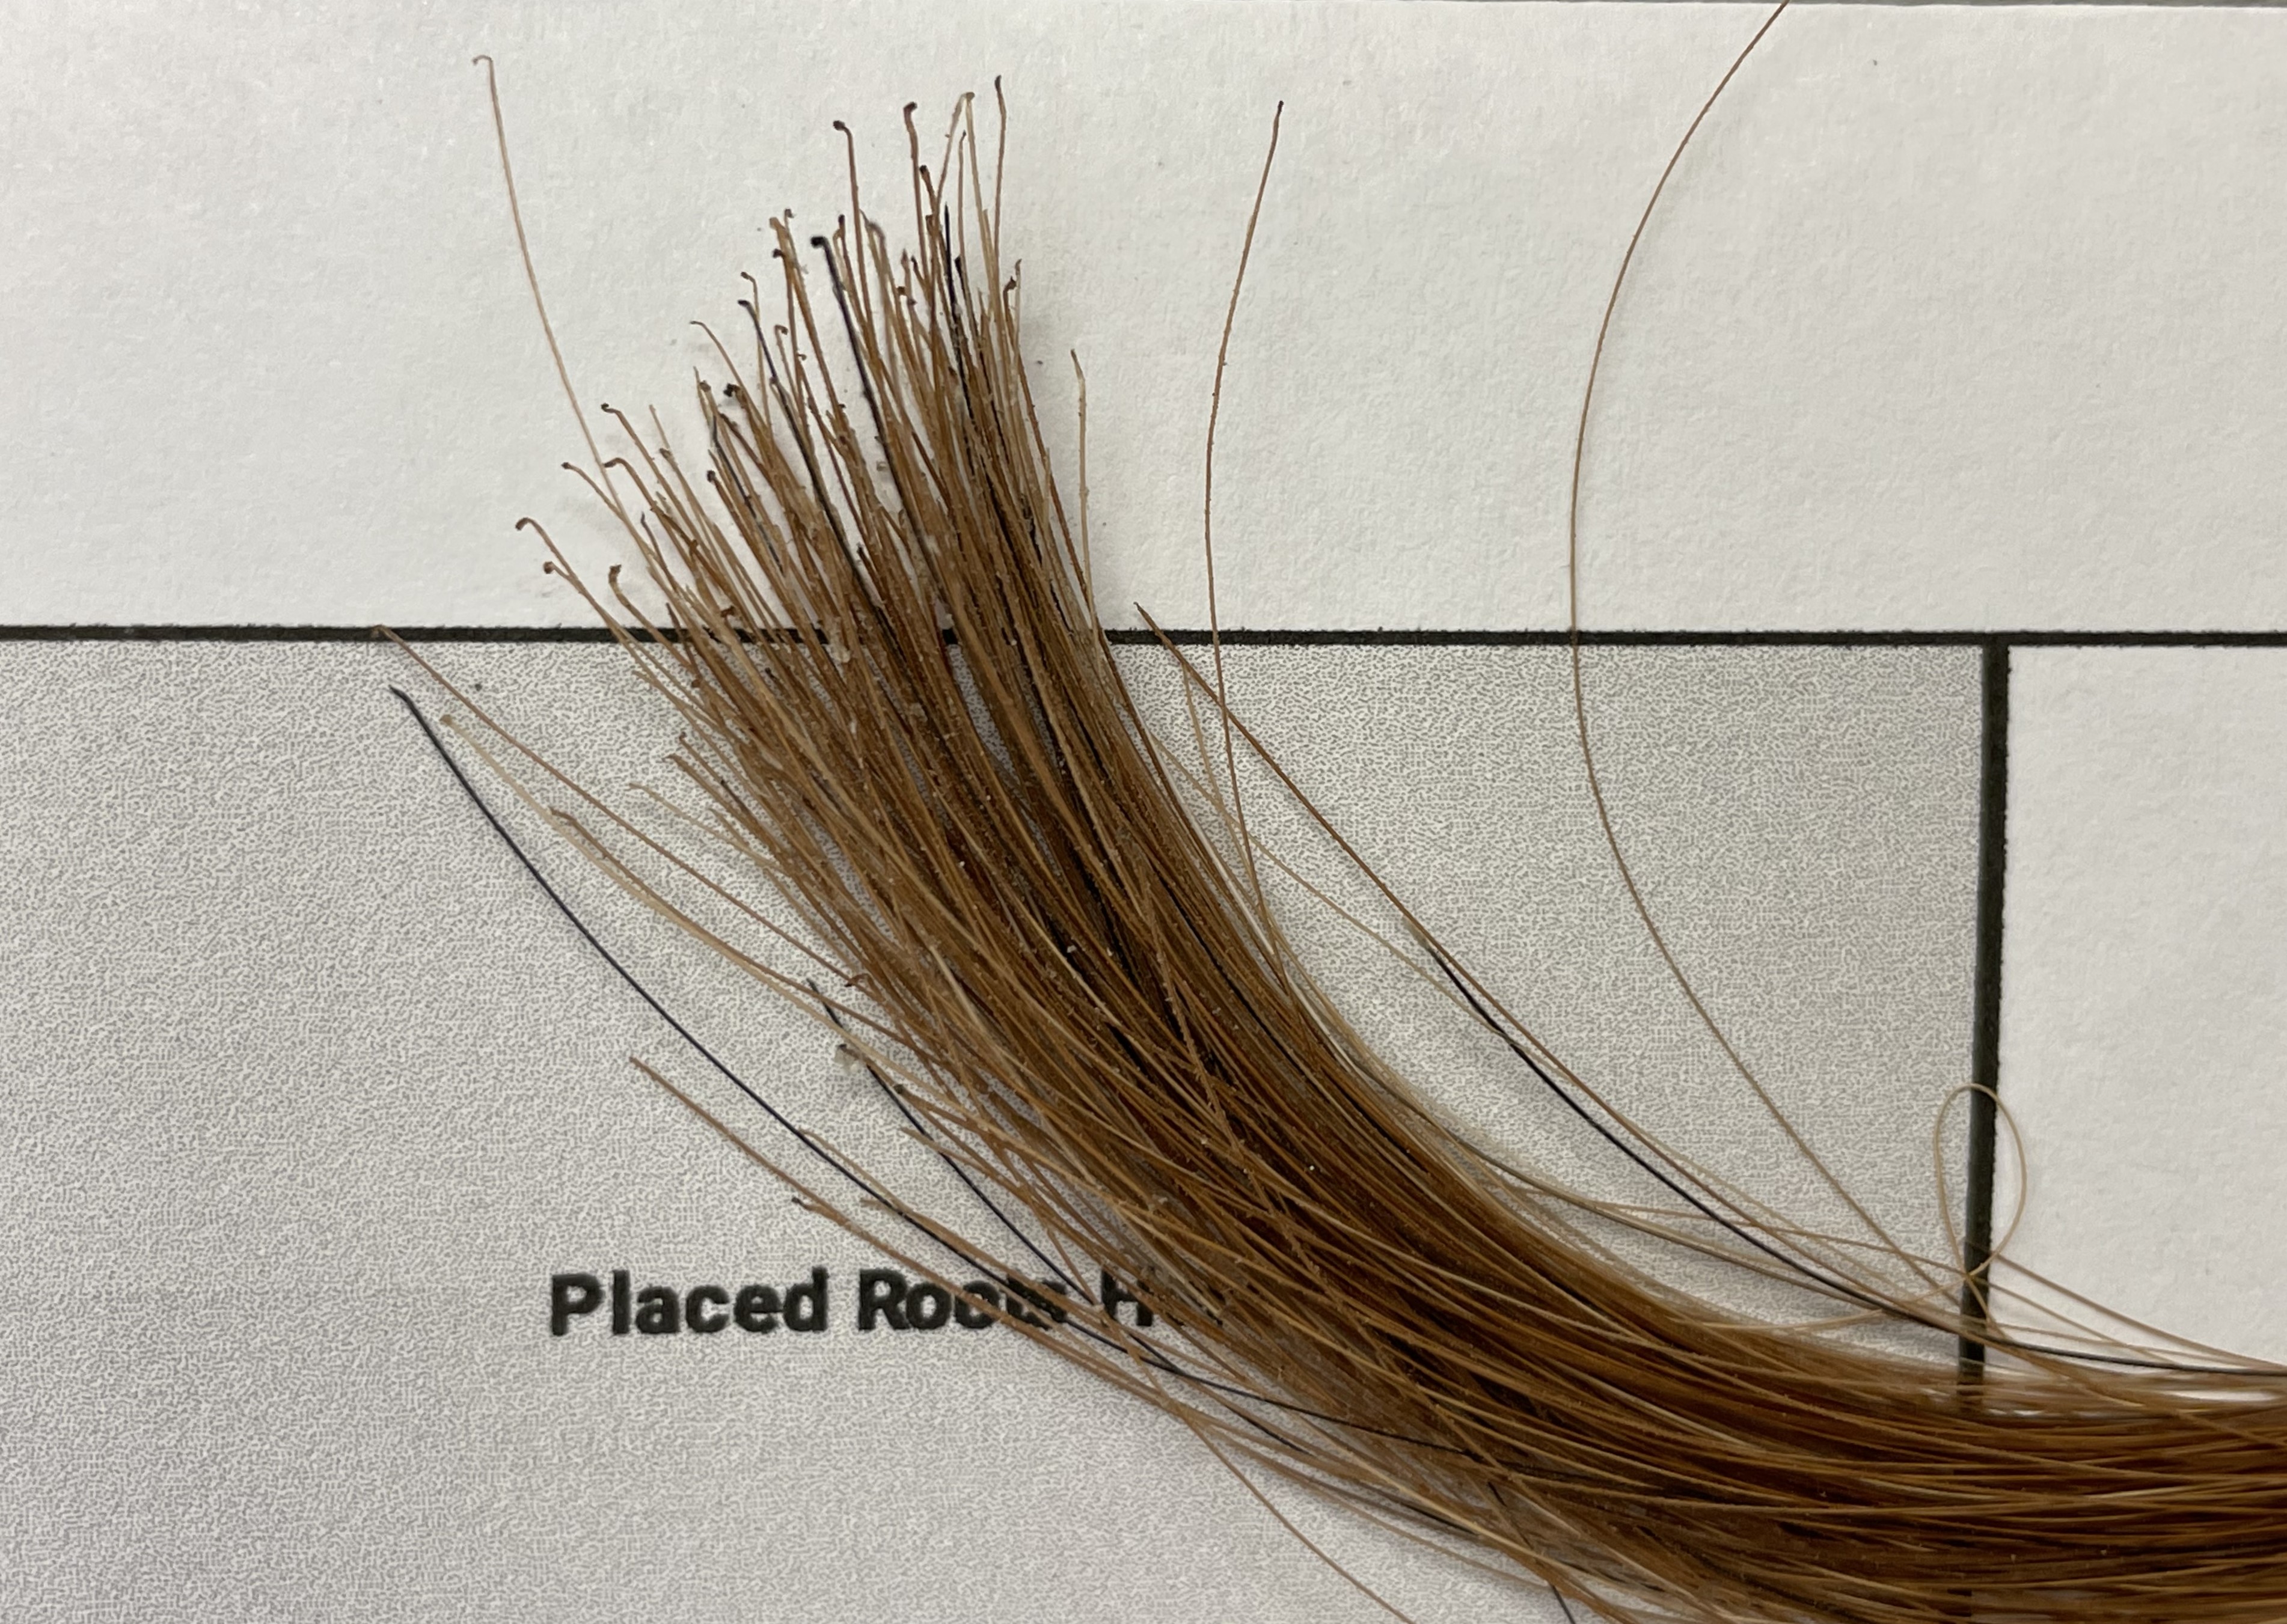 Example of a complete horse hair kit